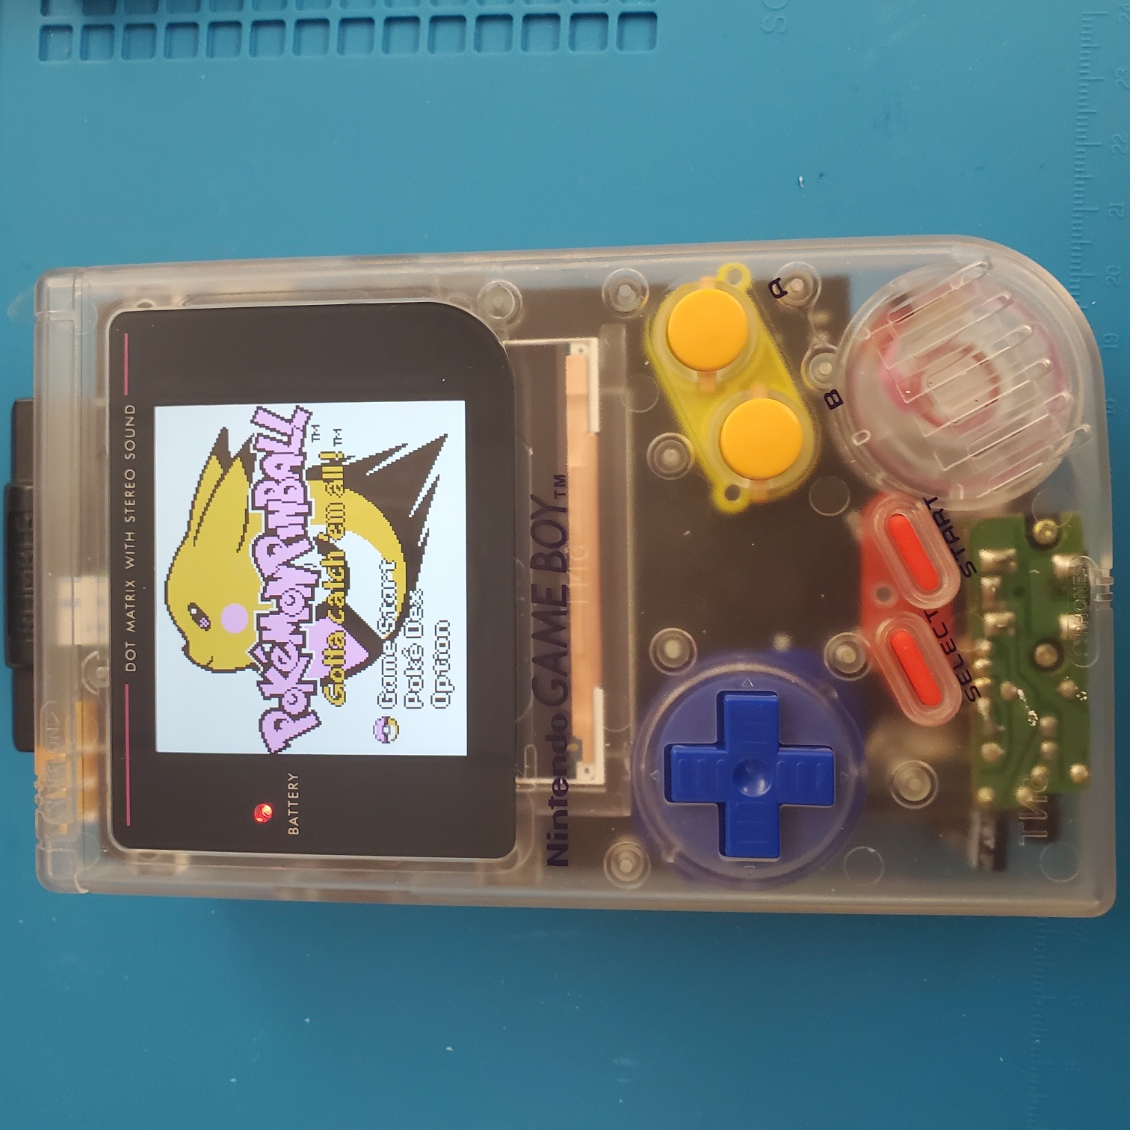 clear gameboy DMG with a visible black board underneath, as well as red, yellow, and blue buttons. pokemon pinball is on screen